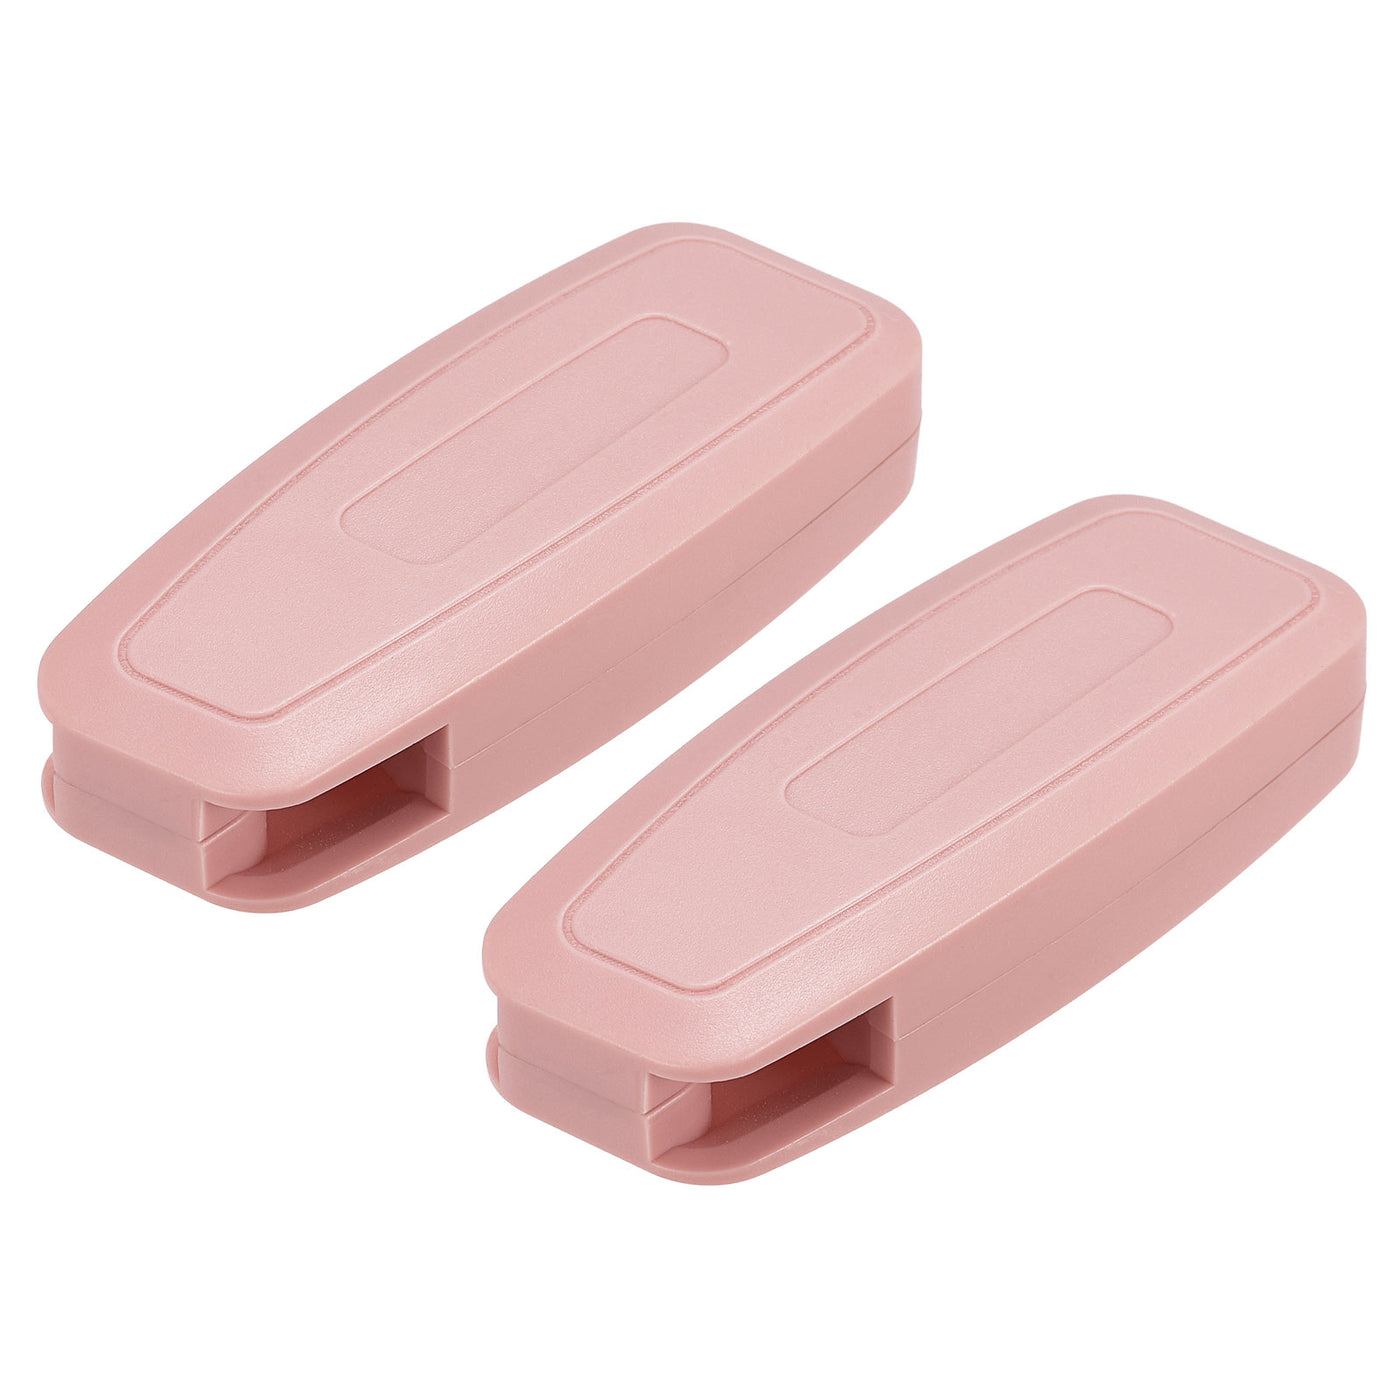 uxcell Uxcell Blinds Chain Handle, 2Pcs 80mm Roller Shade Cord Weights for Window Parts, Pink